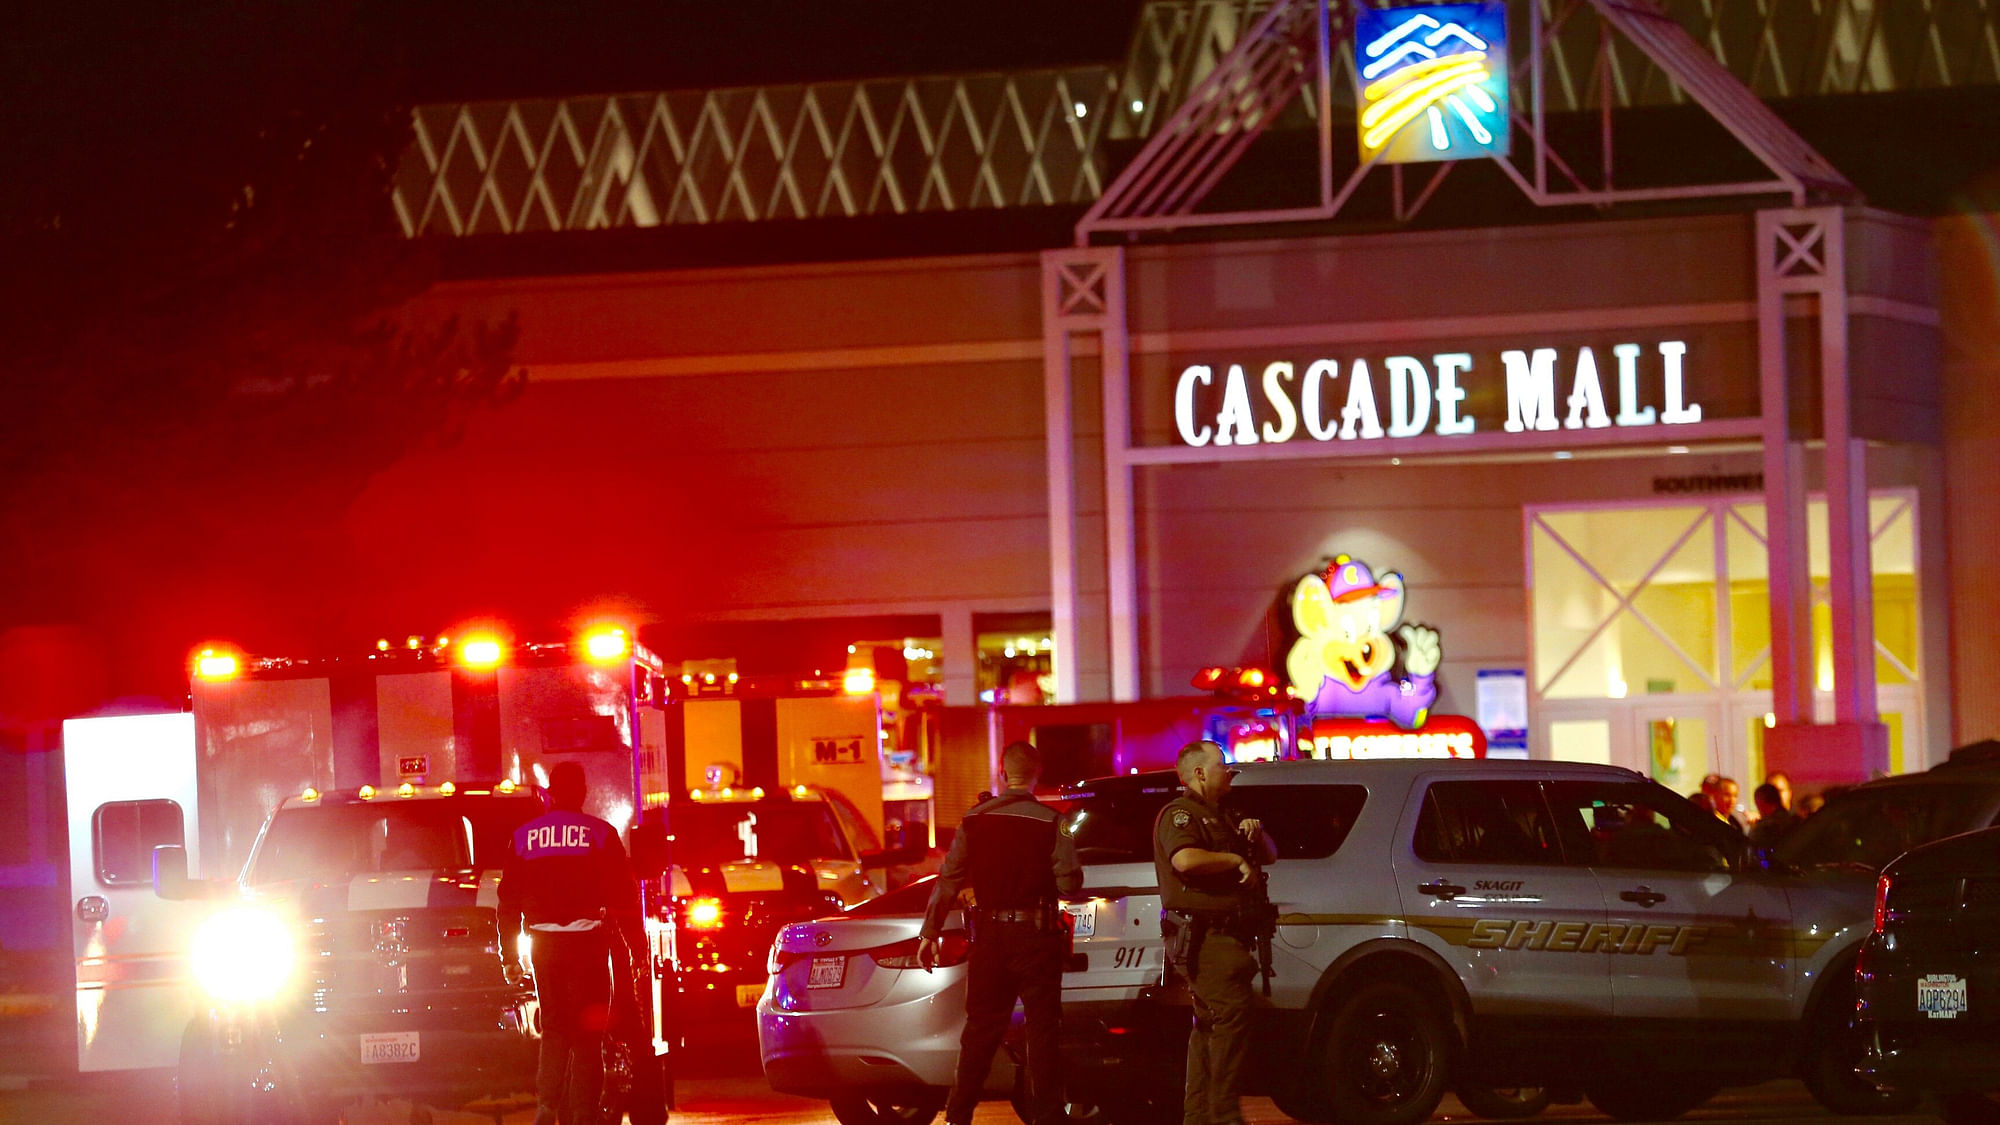 Authorities are looking for the gunman who shot and killed the people at a mall north of Seattle. (Photo: AP)